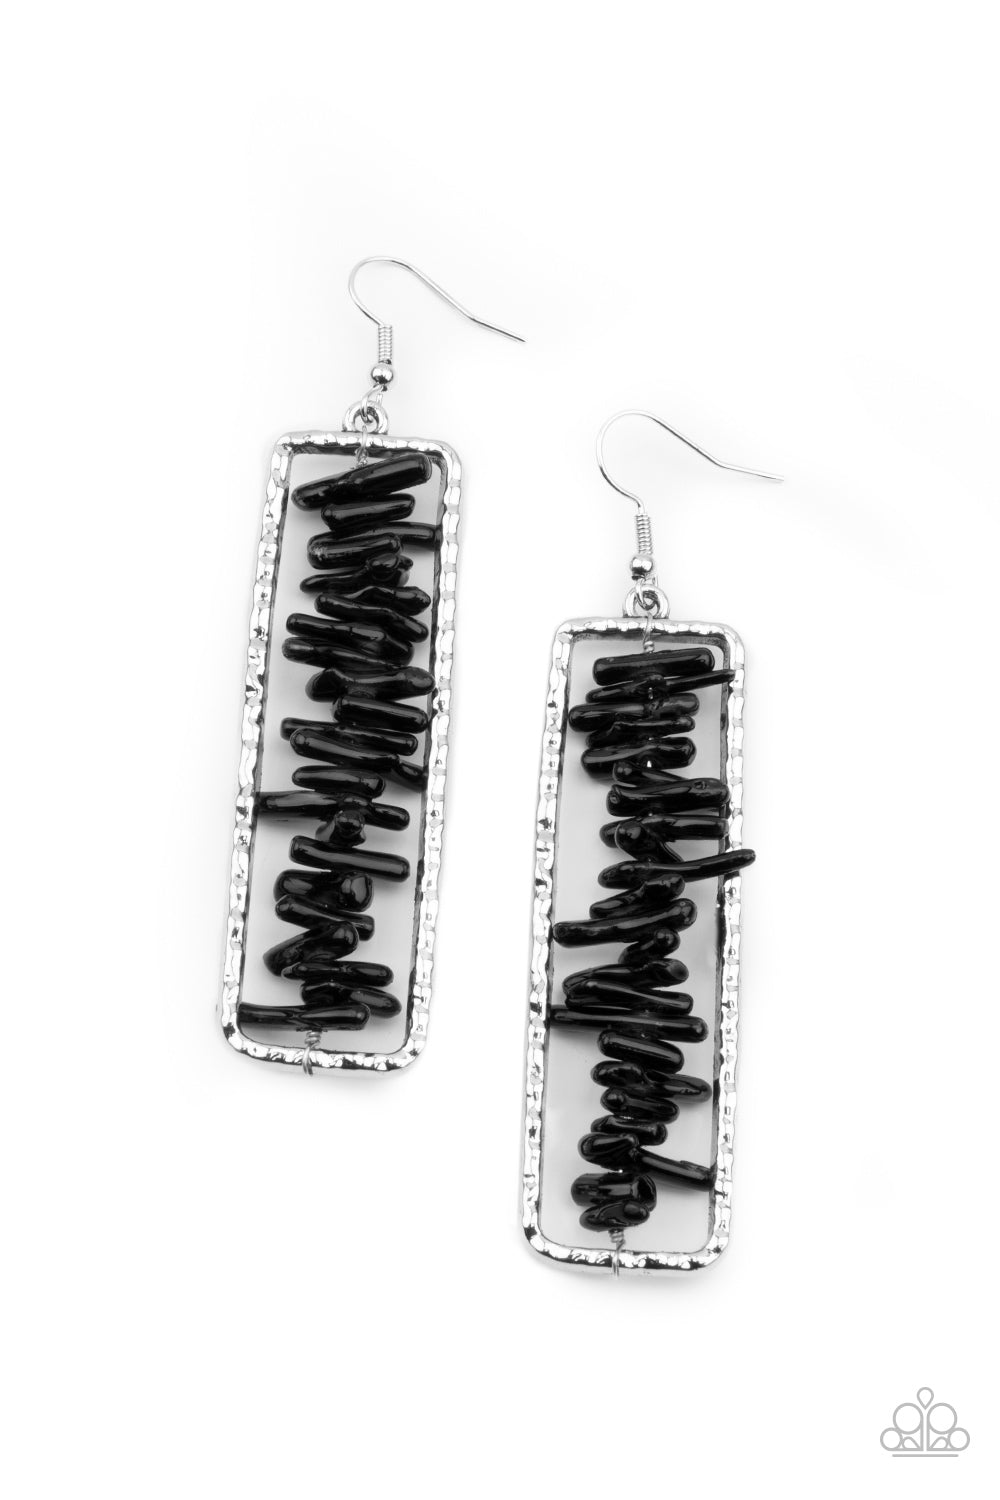 Dont QUARRY, Be Happy - Black Rock and Silver Fashion Earrings - Paparazzi Accessories - Bits of black rock are threaded along a metal rod inside a hammered silver rectangle, creating an earthy frame. Earring attaches to a standard fishhook fitting. Sold as one pair of earrings.